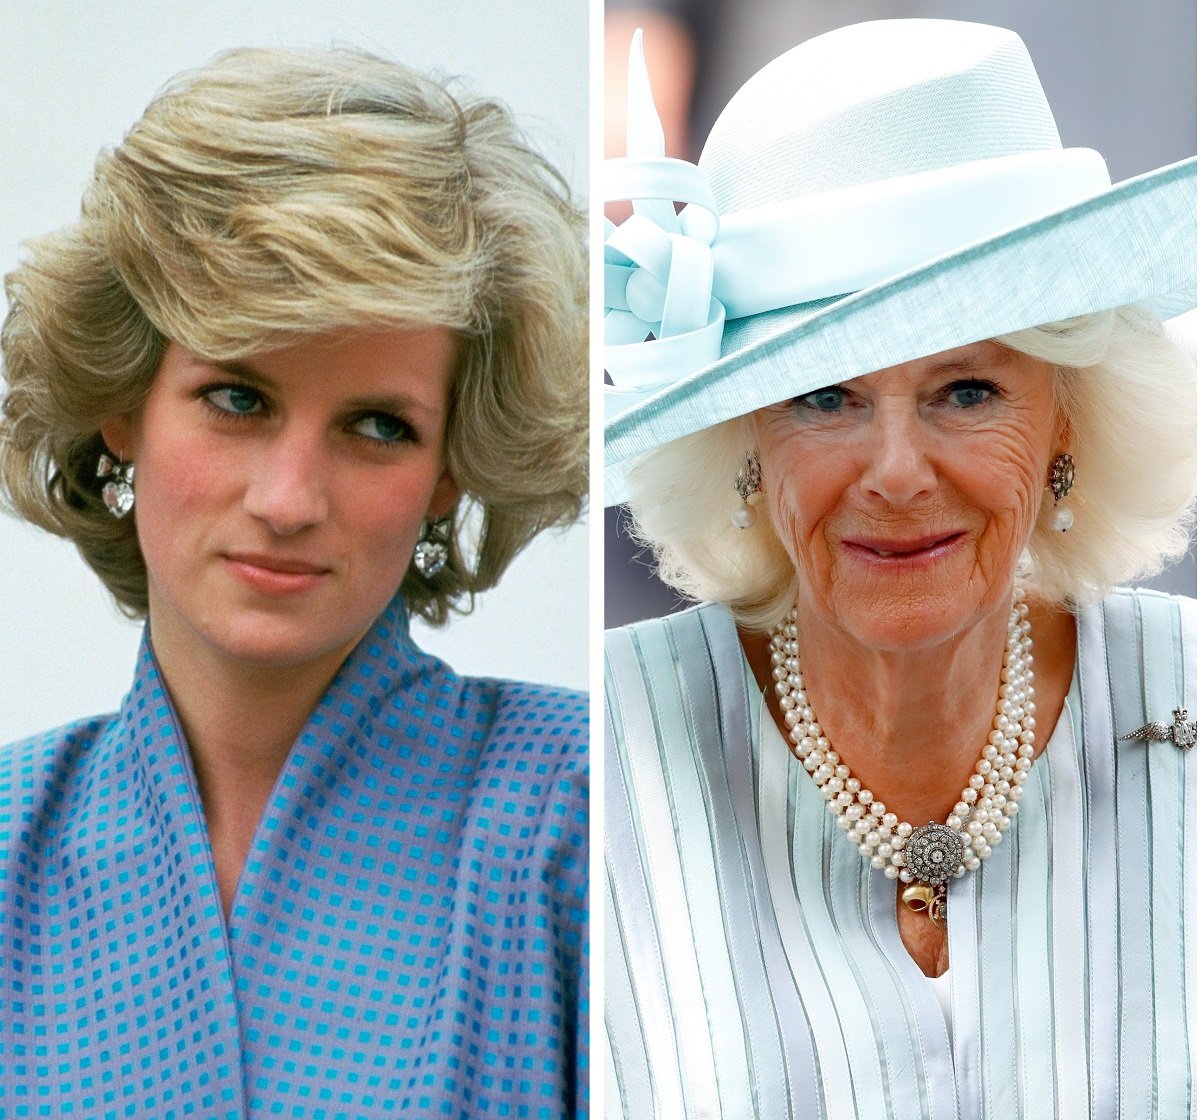 Princess Diana Would Go Out One Door and Camilla Parker Bowles Would Come in Another to See Charles, Says Former Staffer